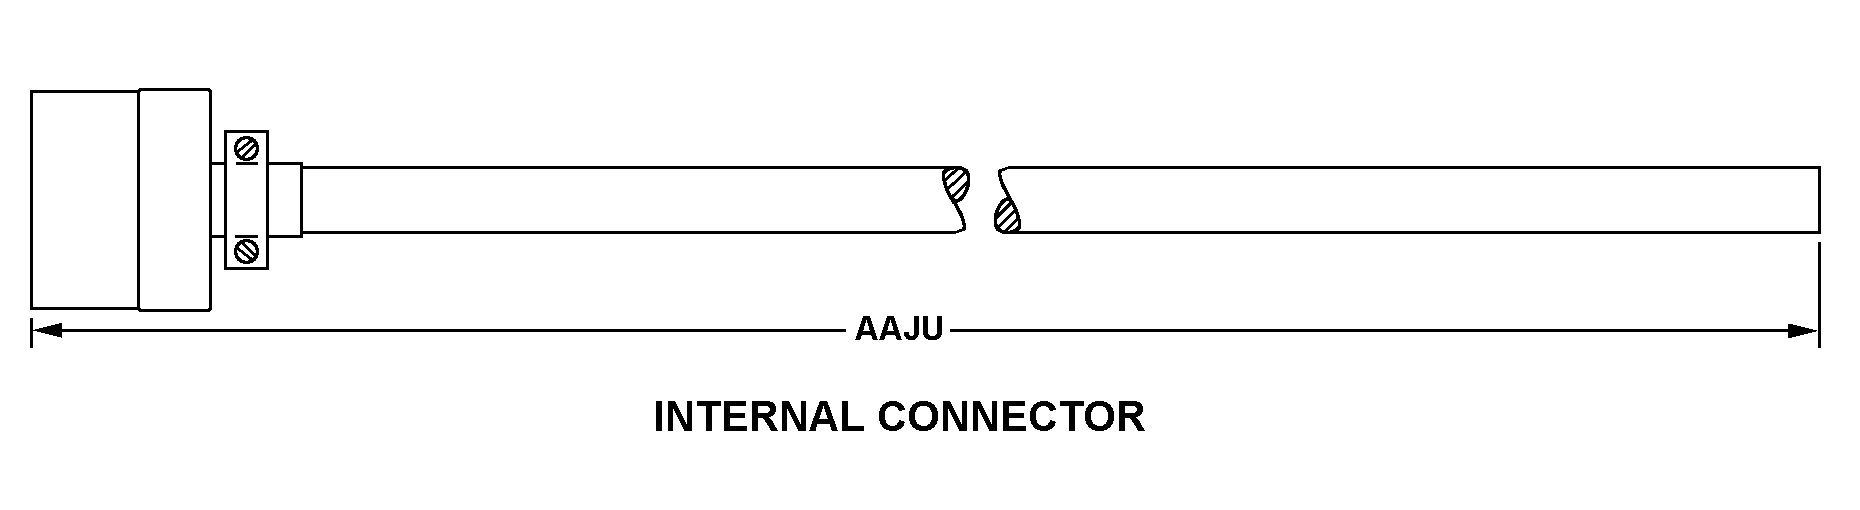 INTERNAL CONNECTOR style nsn 5995-01-409-1462